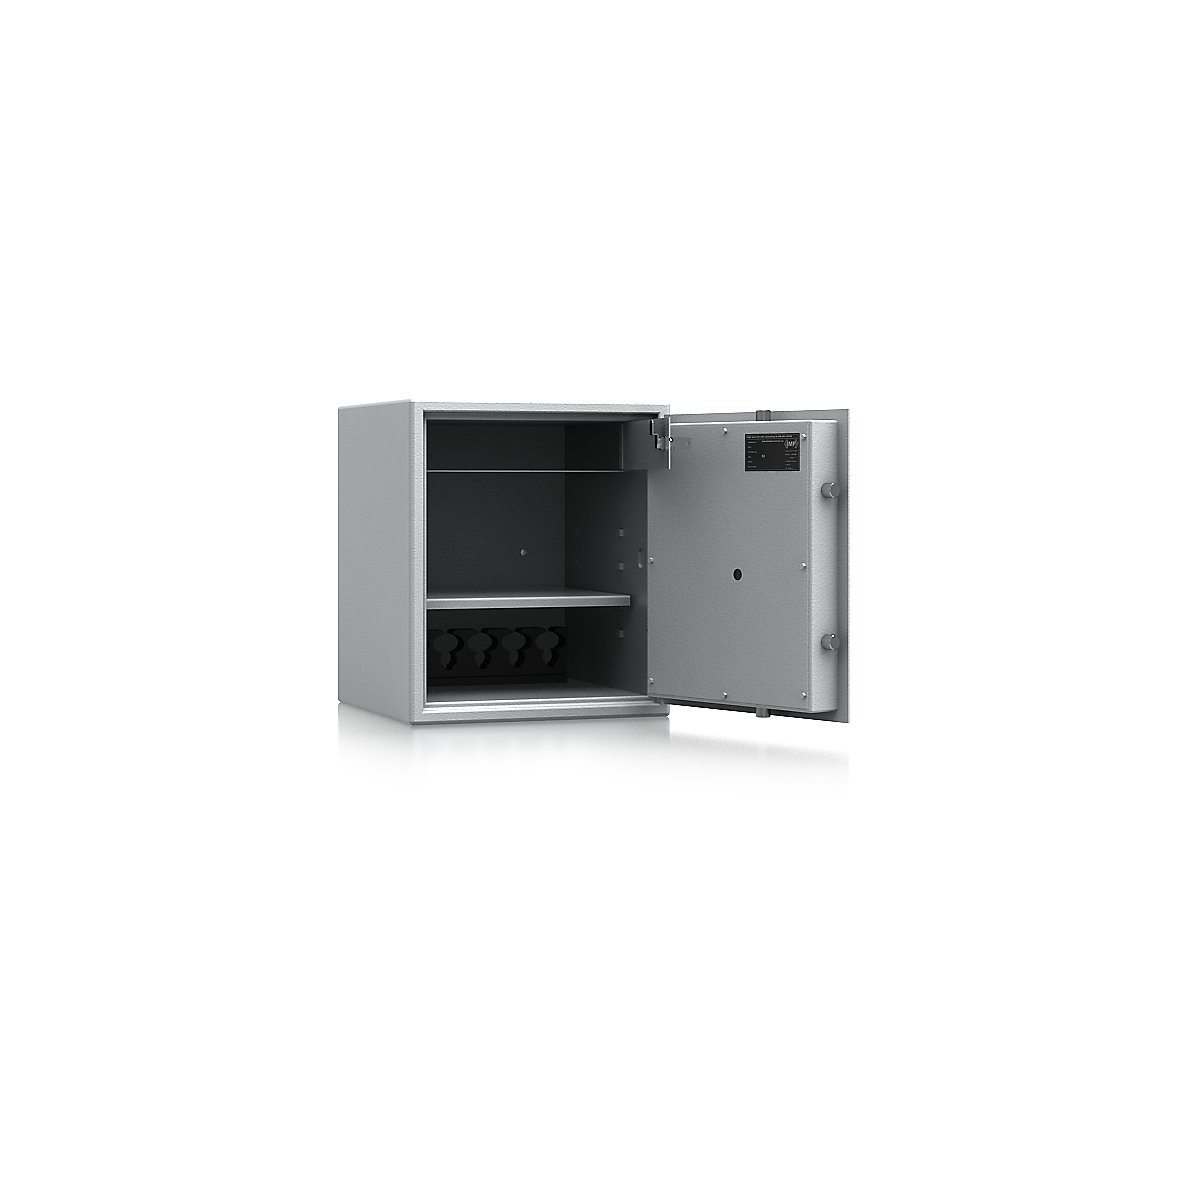 Built-in furniture safe with interior safe, VDMA B, S2, HxWxD 457 x 395 x 382 mm, with weapon holder-6